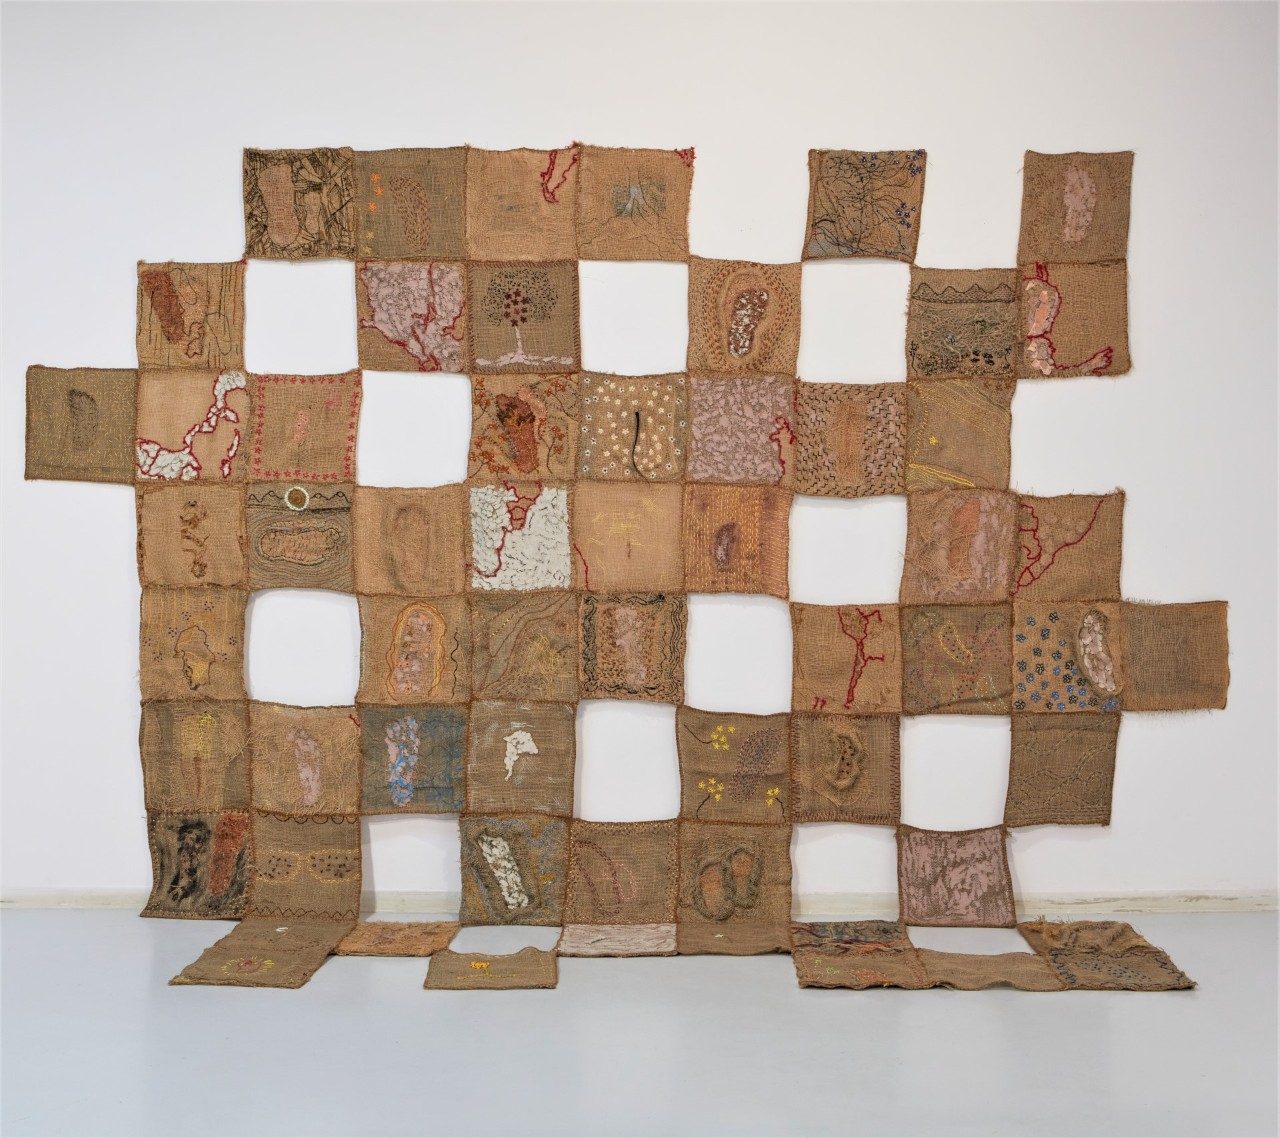 Hanging embroidered patchwork piece made out of jute, assembled in a checker pattern with empty spaces.